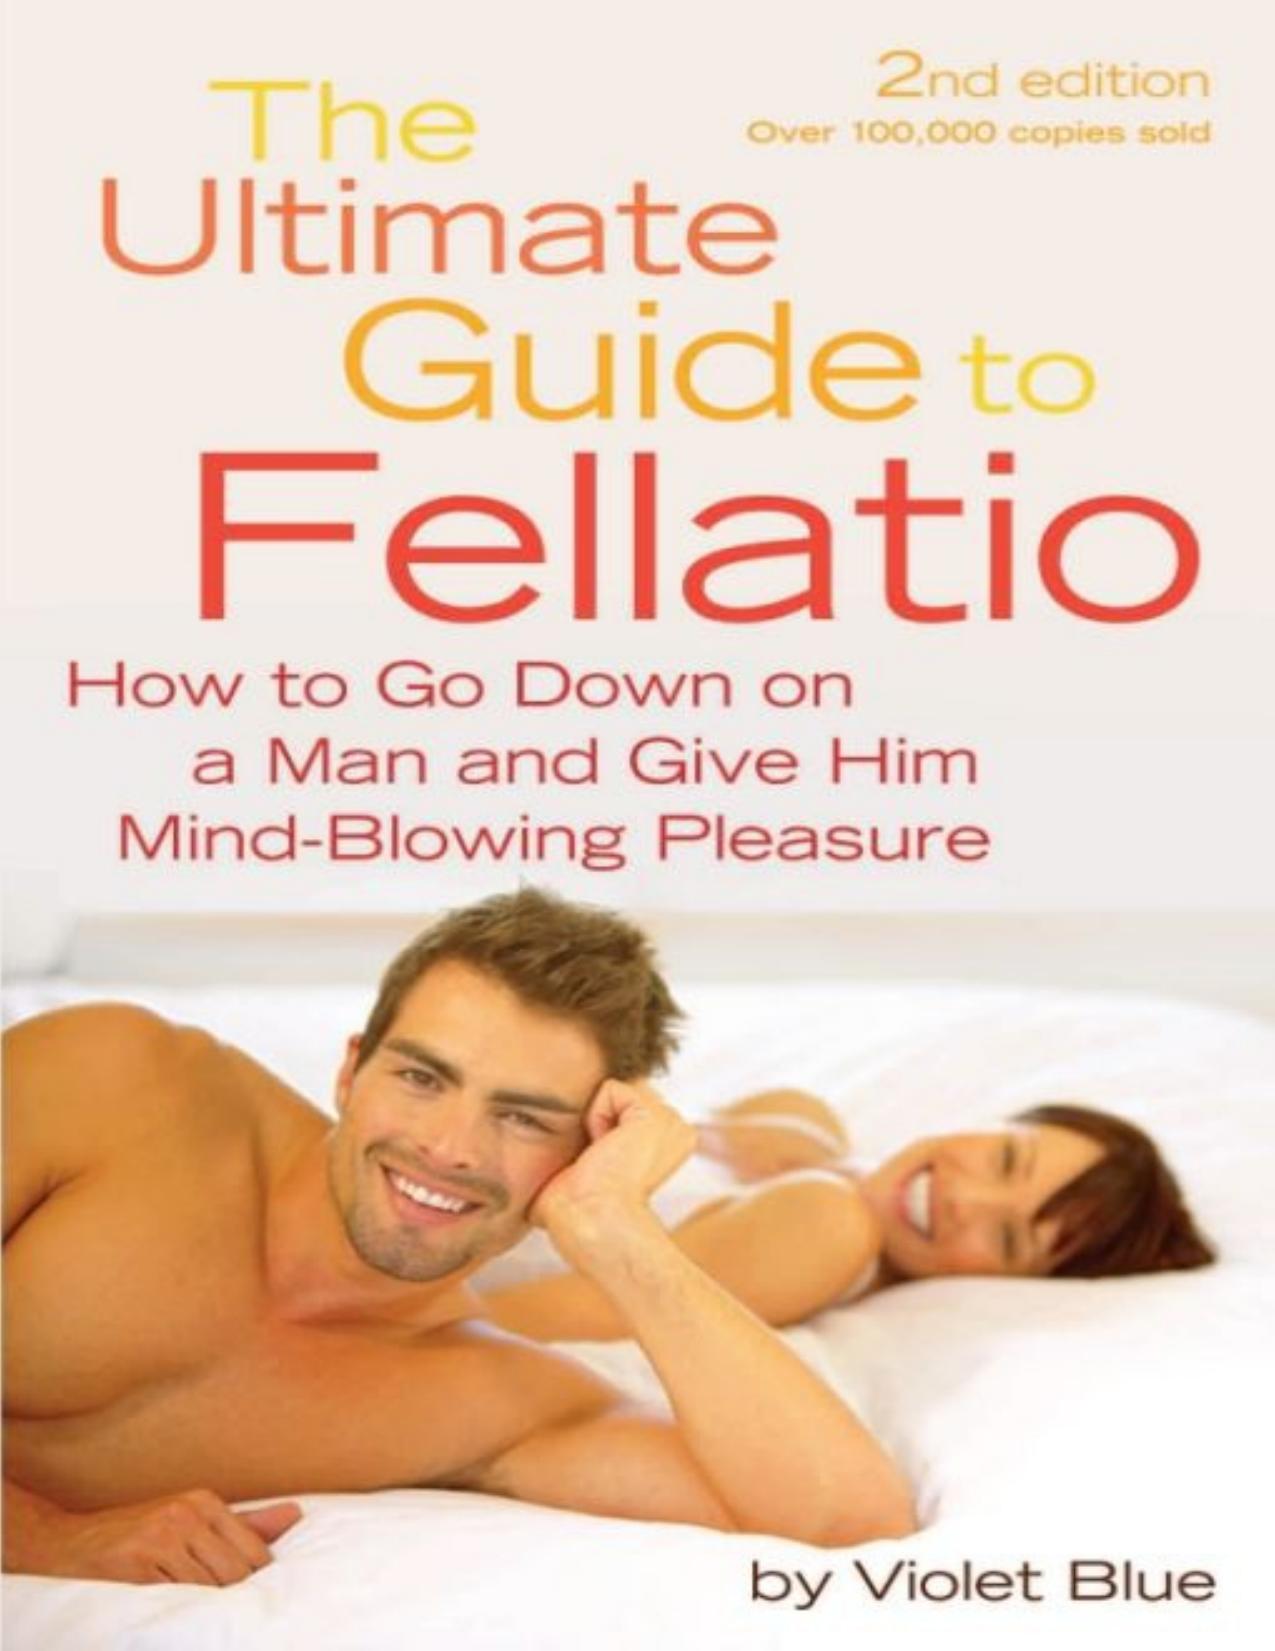 The Ultimate Guide to Fellatio by Violet Blue